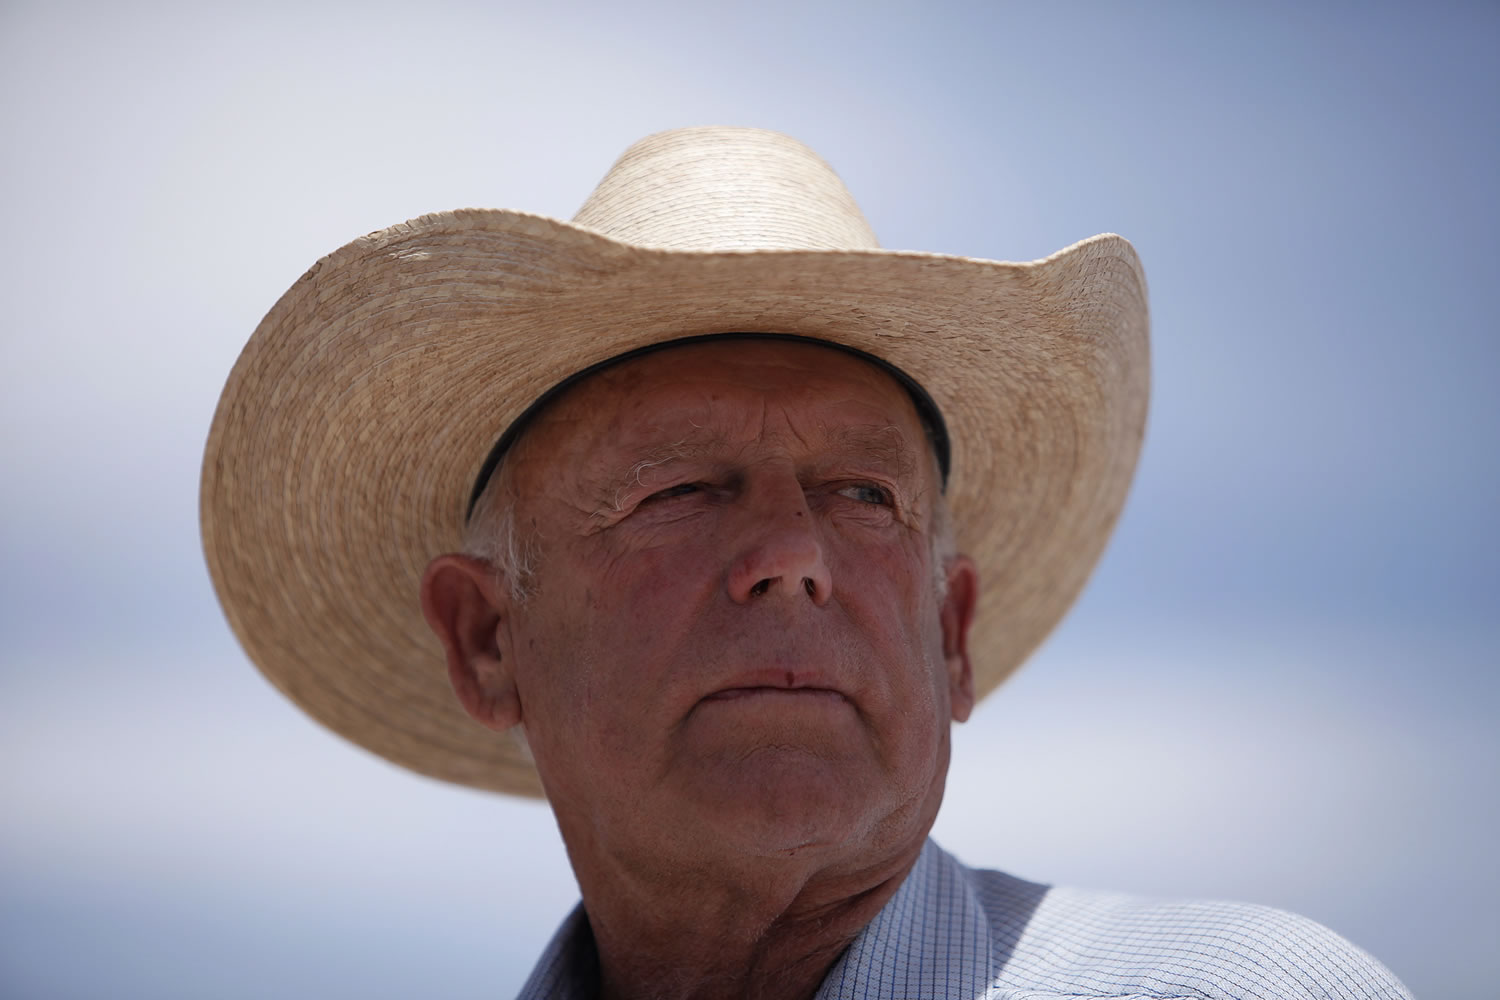 Cliven Bundy became a folk hero to some because of his dispute with federal officials over his cattle grazing on federal land near his property.